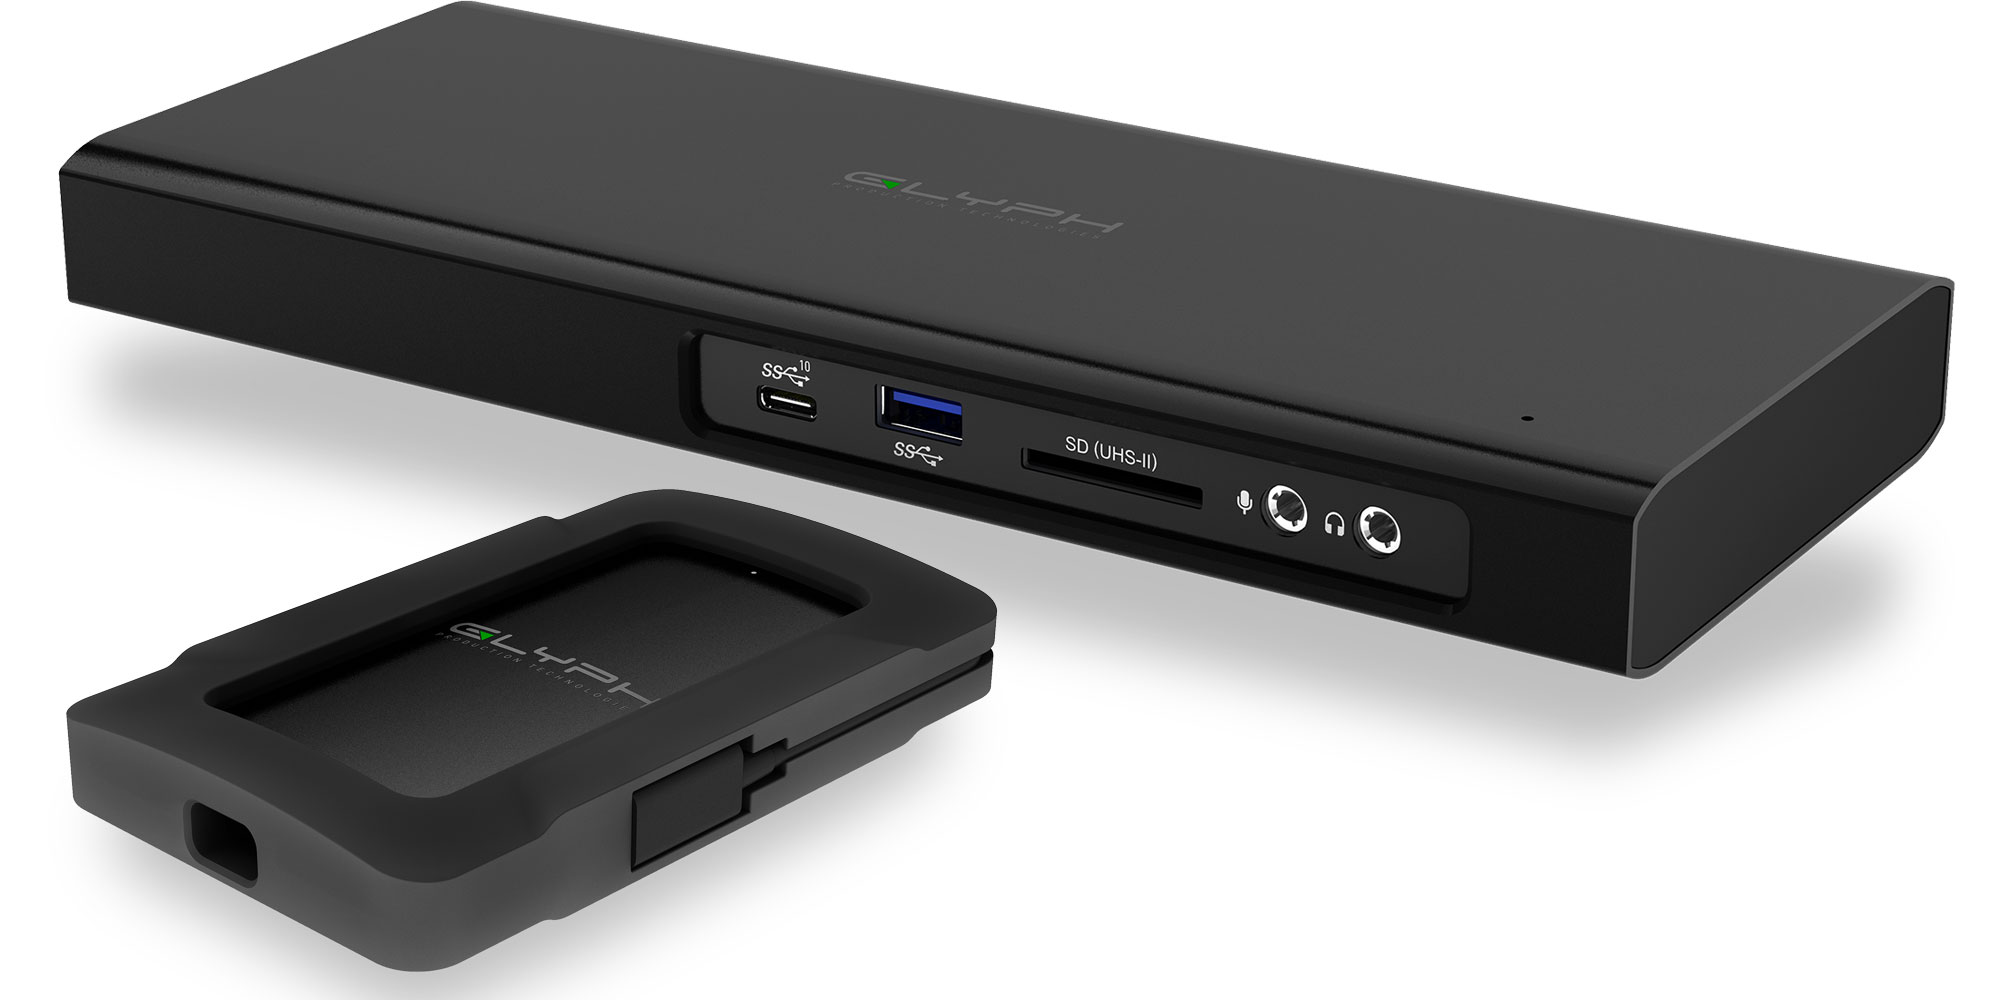 Glyph offers a Thunderbolt 3 Dock w/ built-in NVMe SSD, more